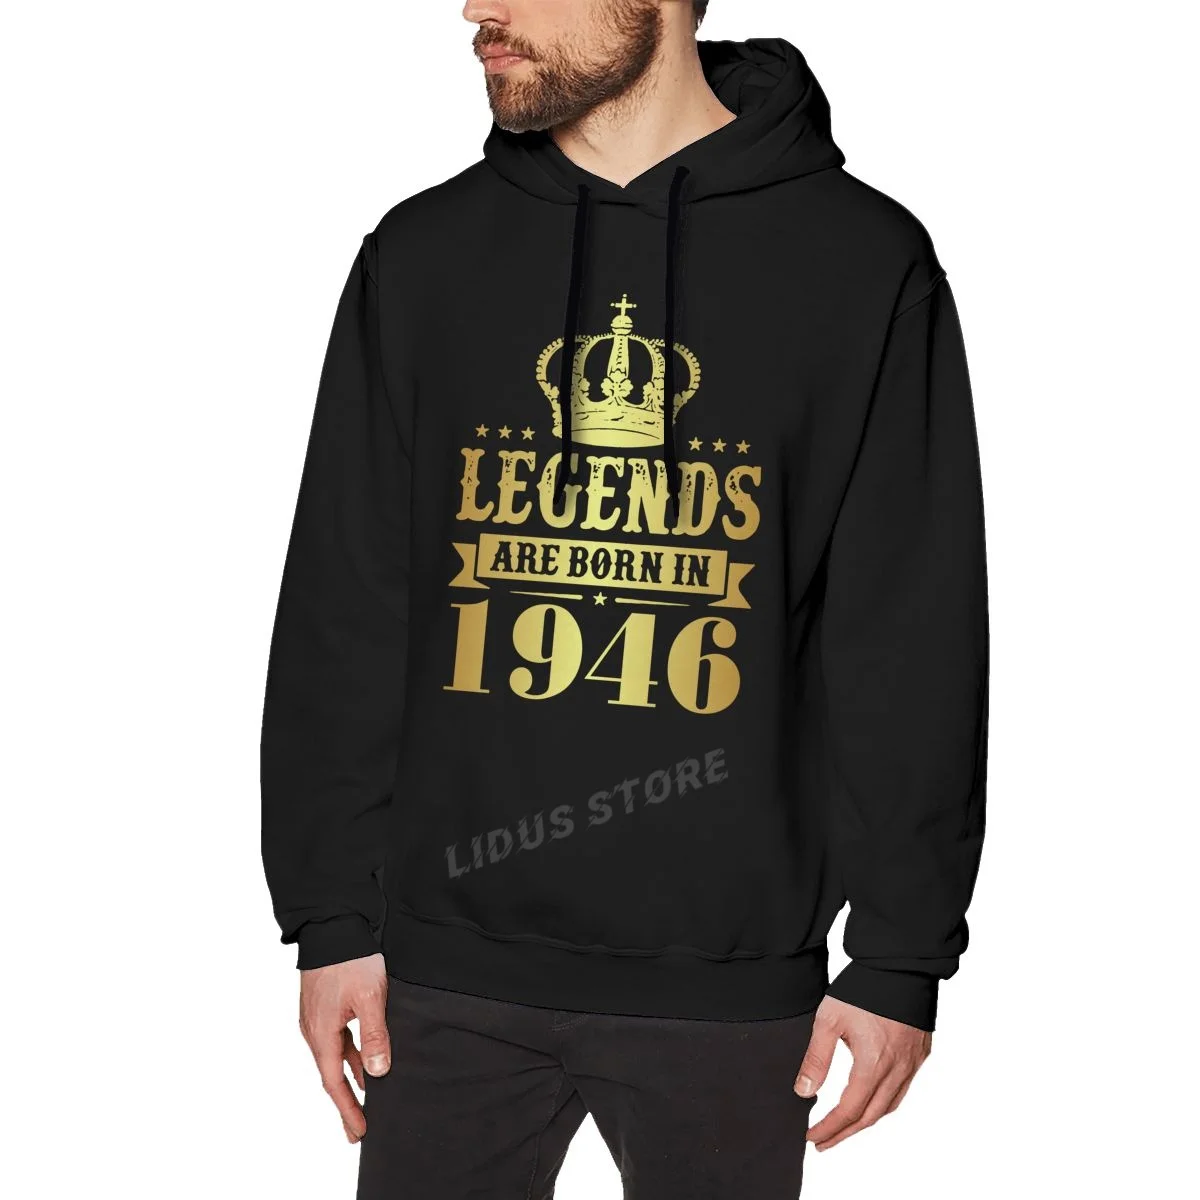 

Legends Are Born In 1946 76 Years For 76th Birthday Gift Hoodie Sweatshirts Harajuku clothes 100% Cotton Streetwear Hoodies